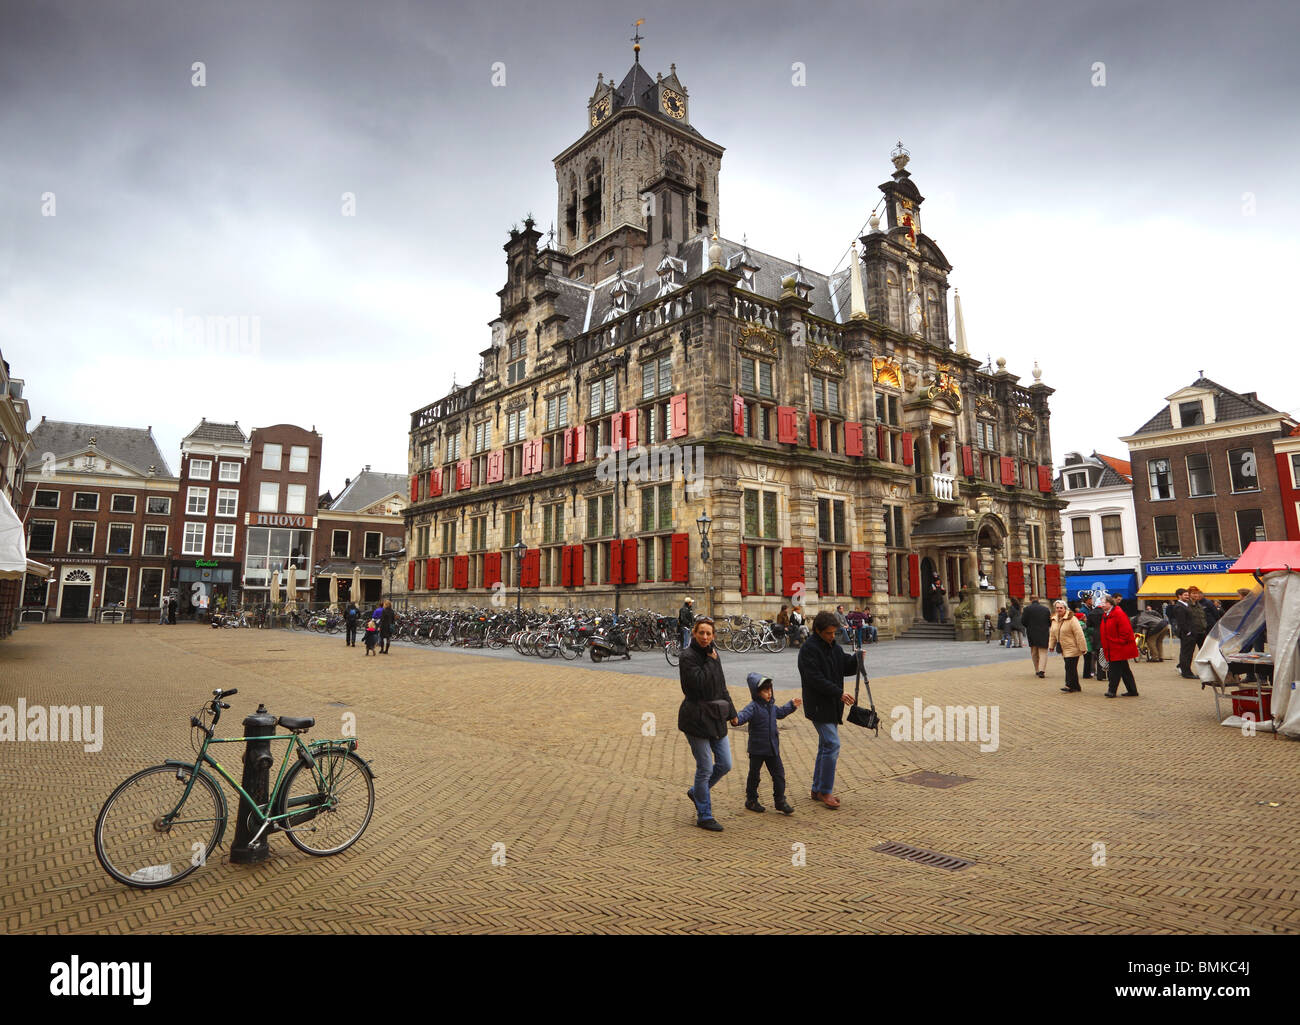 The Town Hall dating from 1620 in the Markt in Delft, Holland Stock Photo